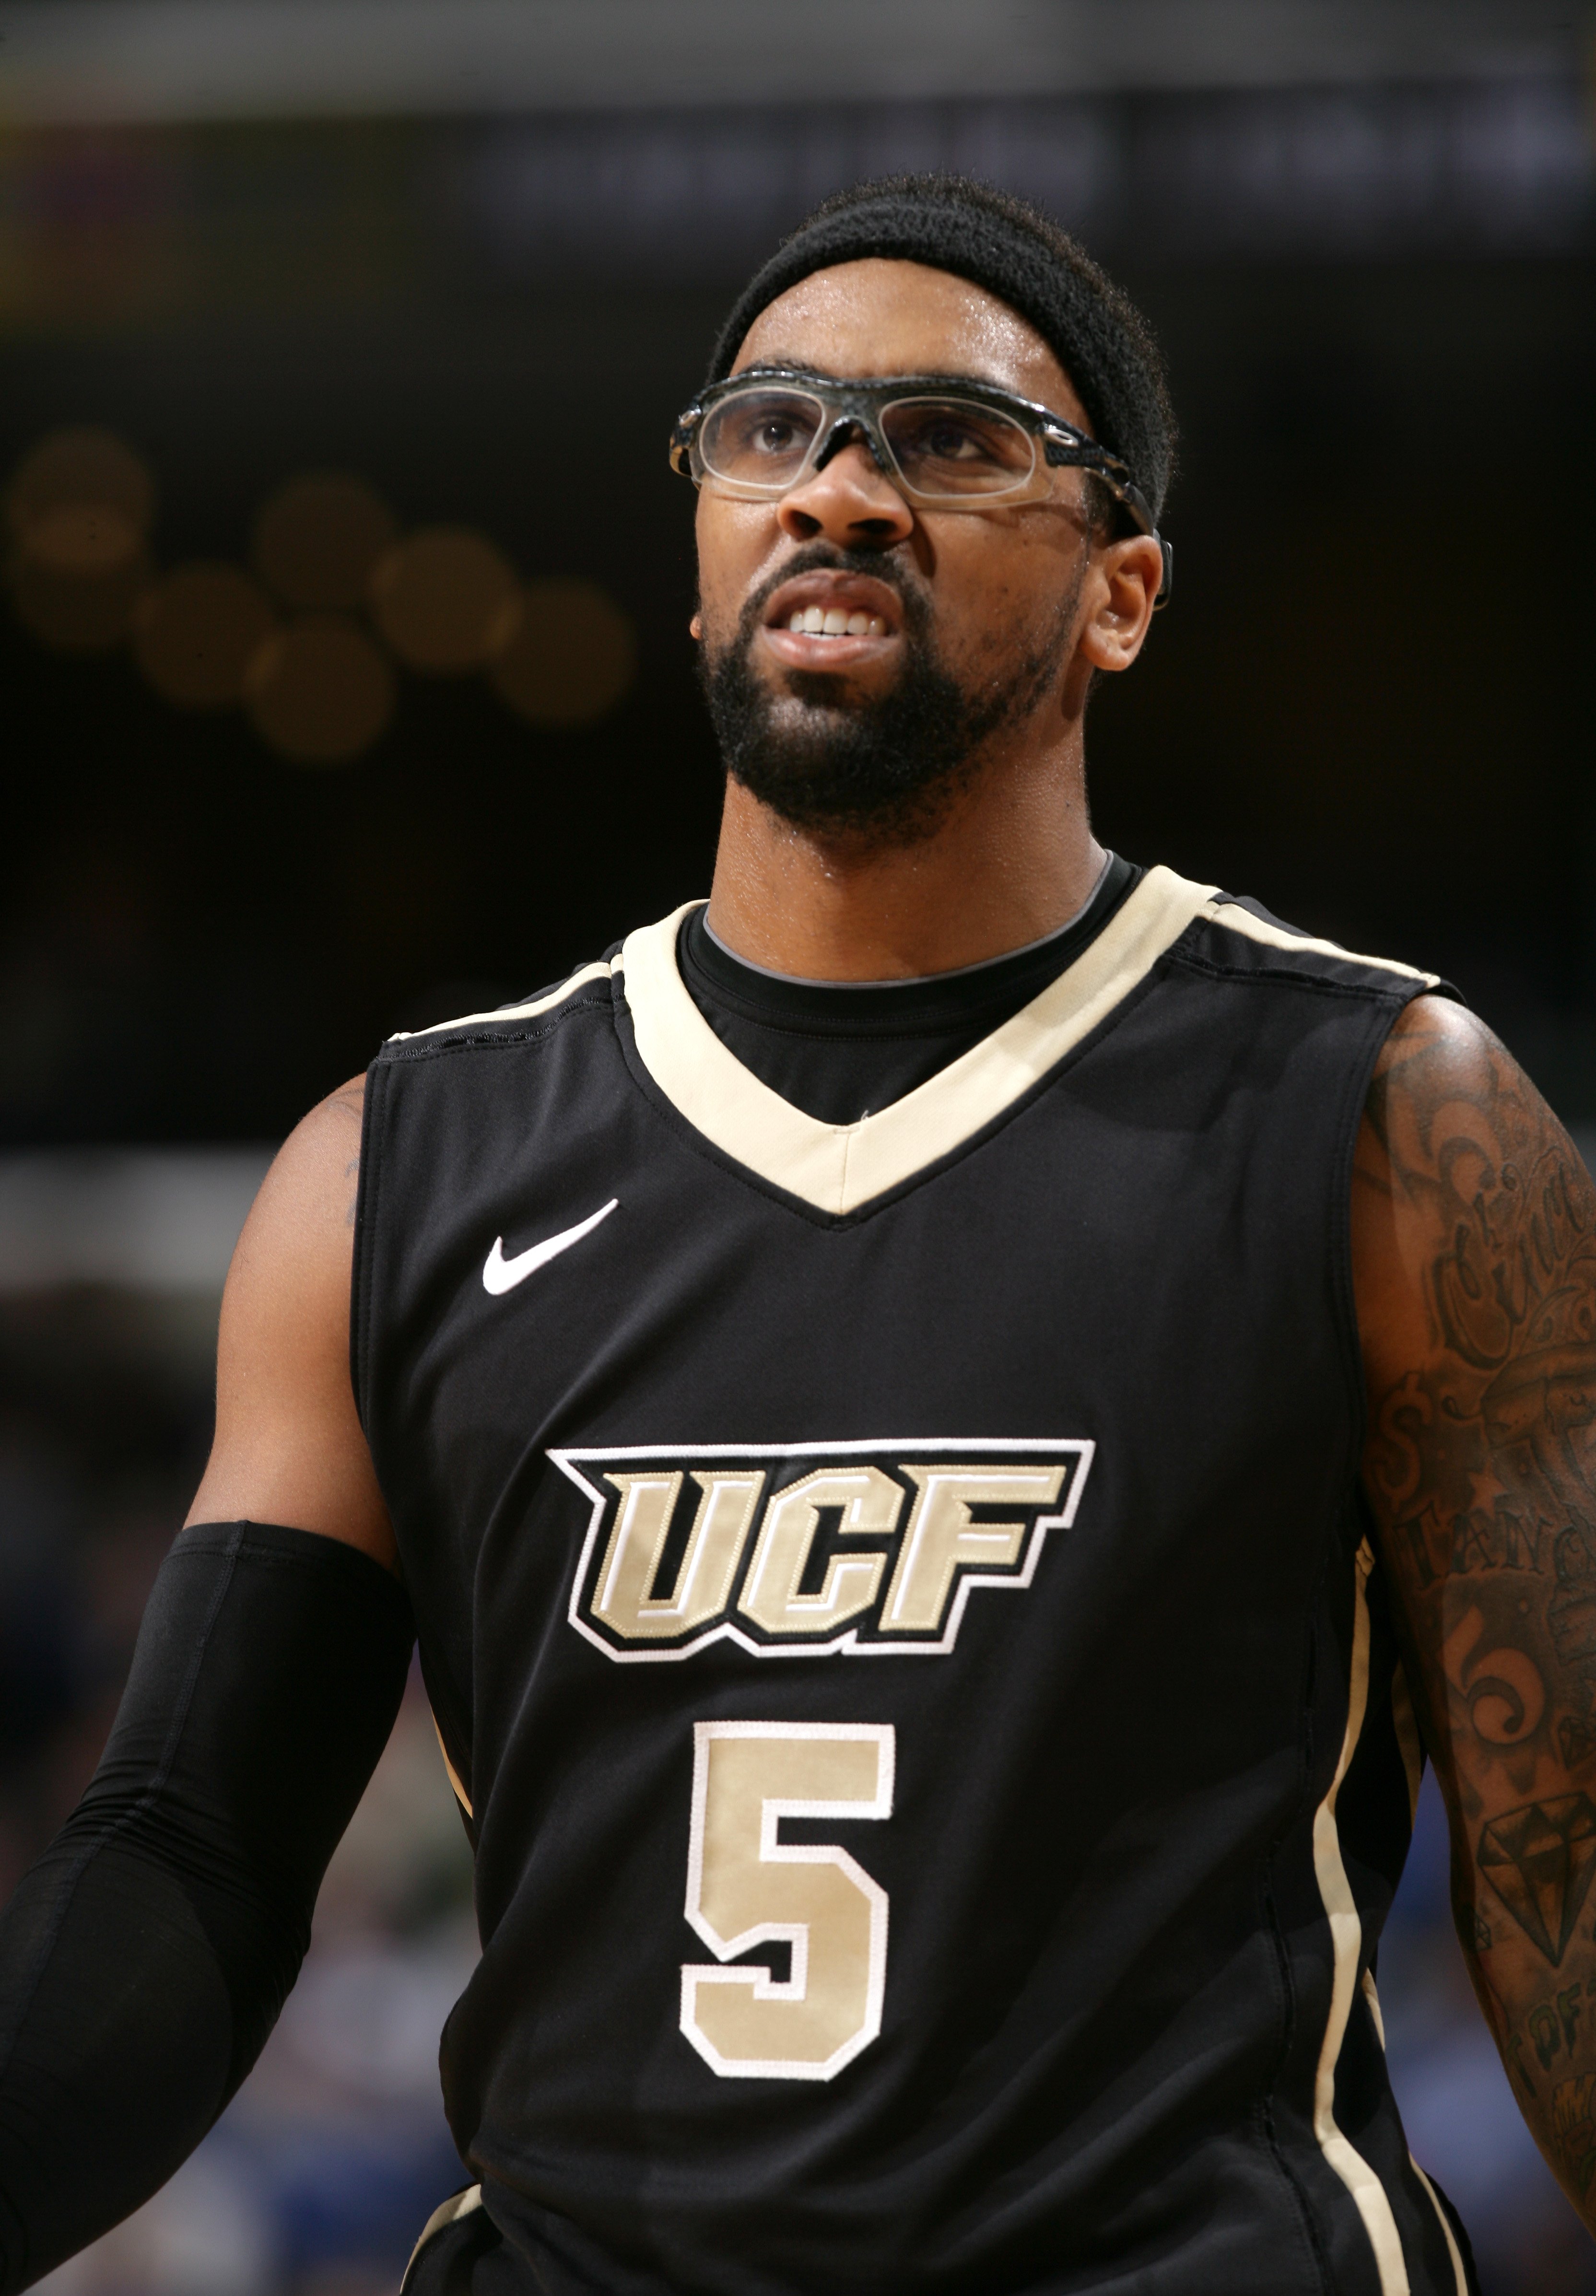 Marcus Jordan playing for UCF Knights on January 26, 2011 | Source: Getty Images